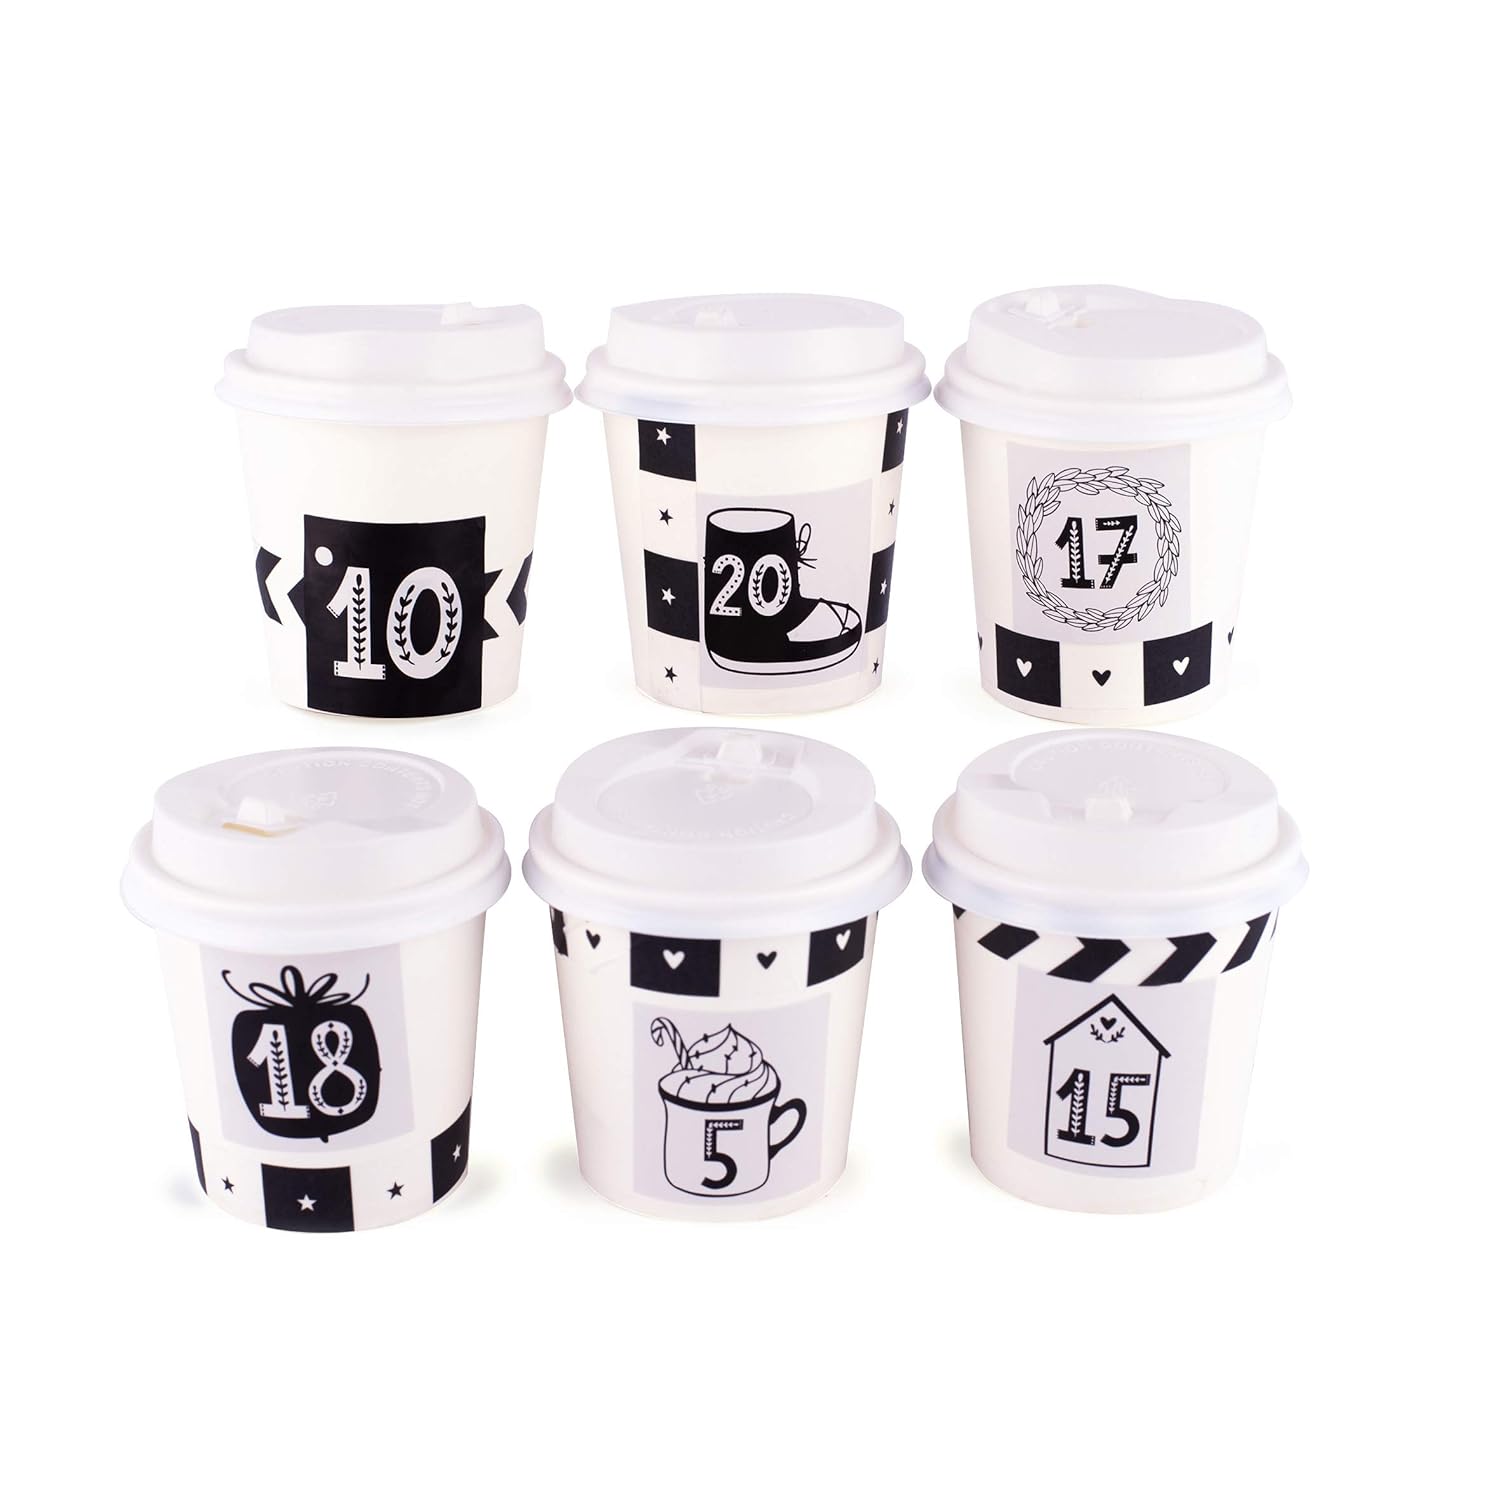 Pajoma Advent Calendar Cups, 24 Cups for Filling, including Stickers and Accessories